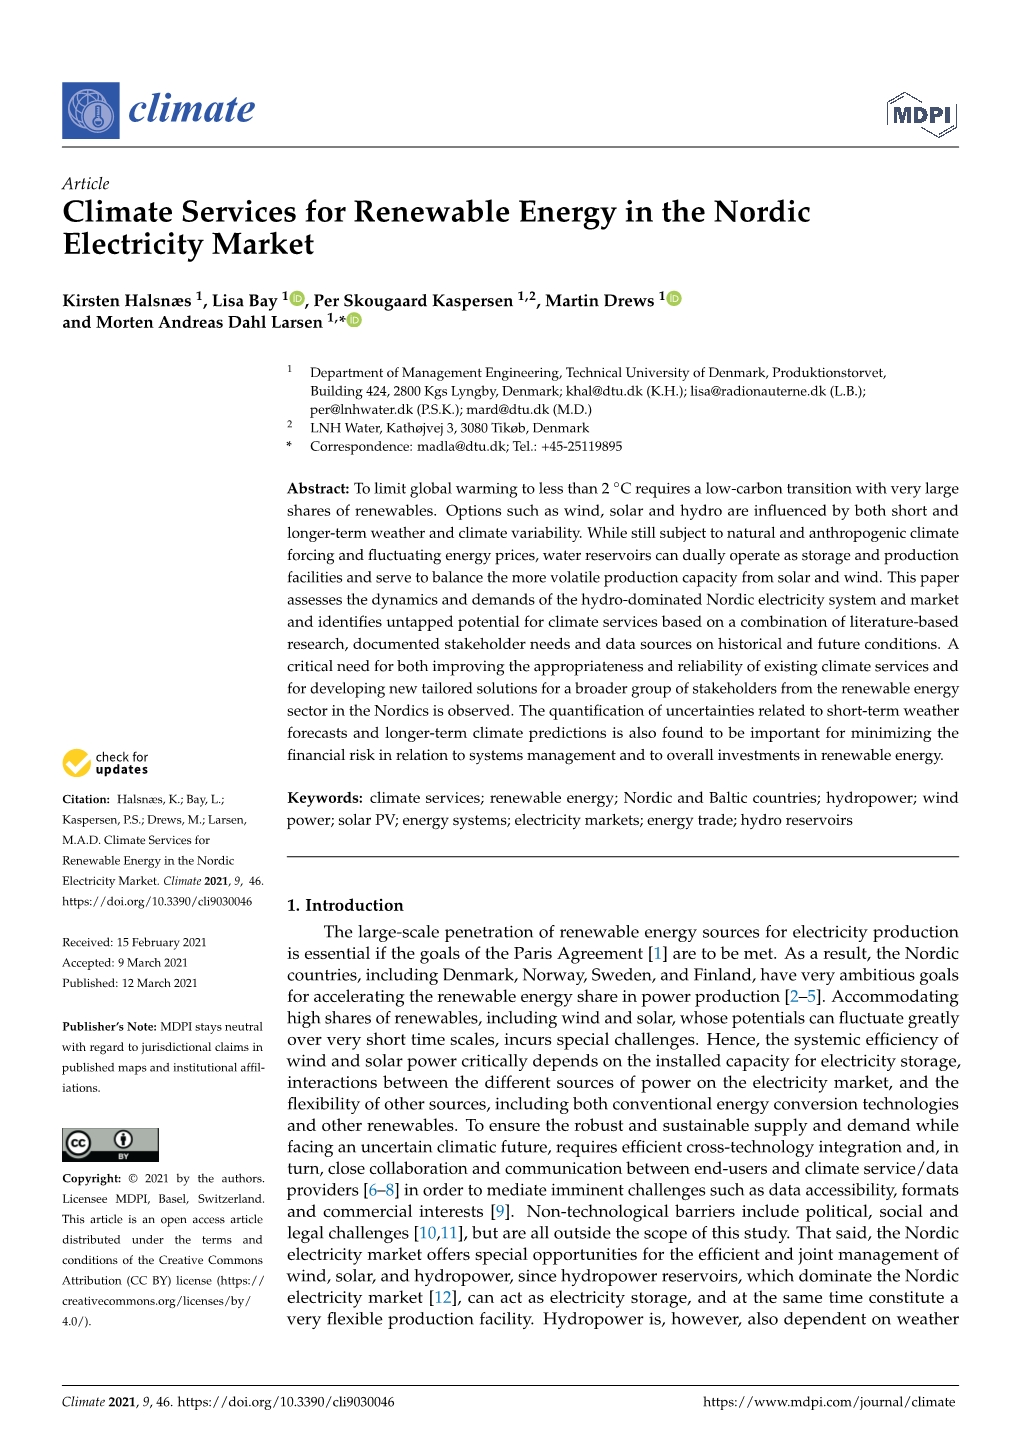 Climate Services for Renewable Energy in the Nordic Electricity Market